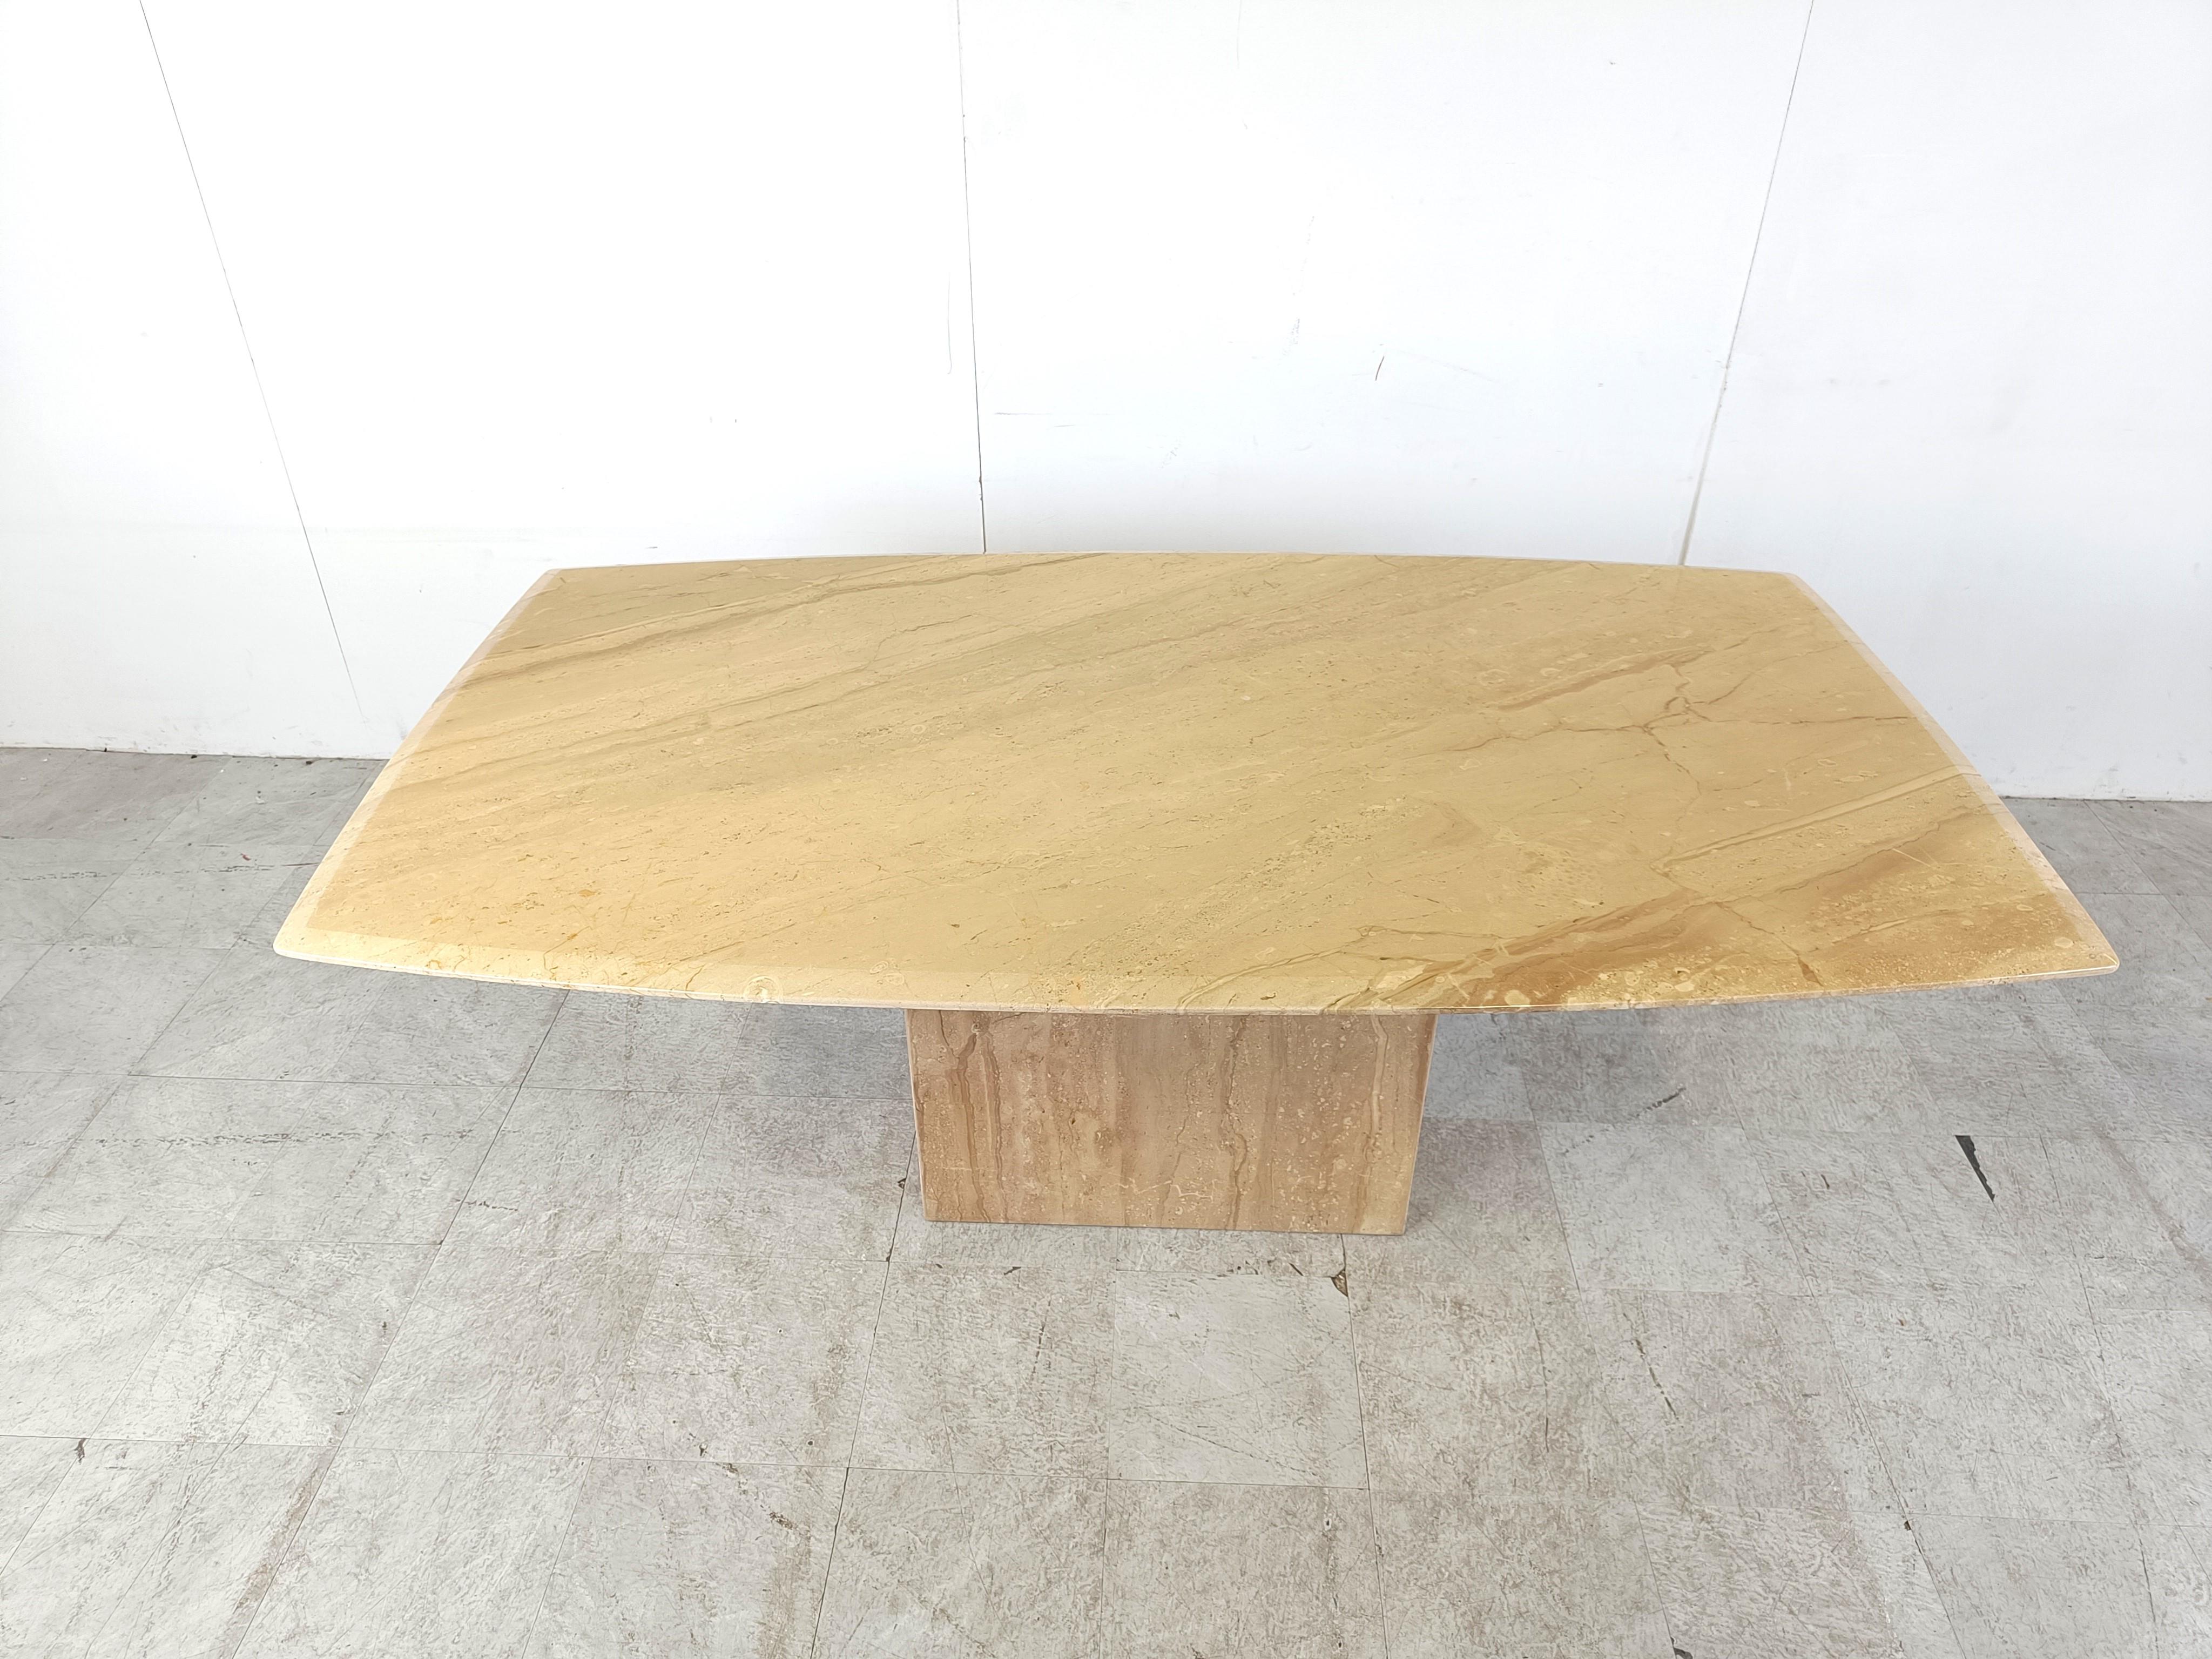 Elegant travertine dining table with a beautiful naturally veined table top with a beveled edge.

Timeless piece.

Sits up to 8 people.

1970s - Italy

Dimensions:
Height: 72cm/28.34